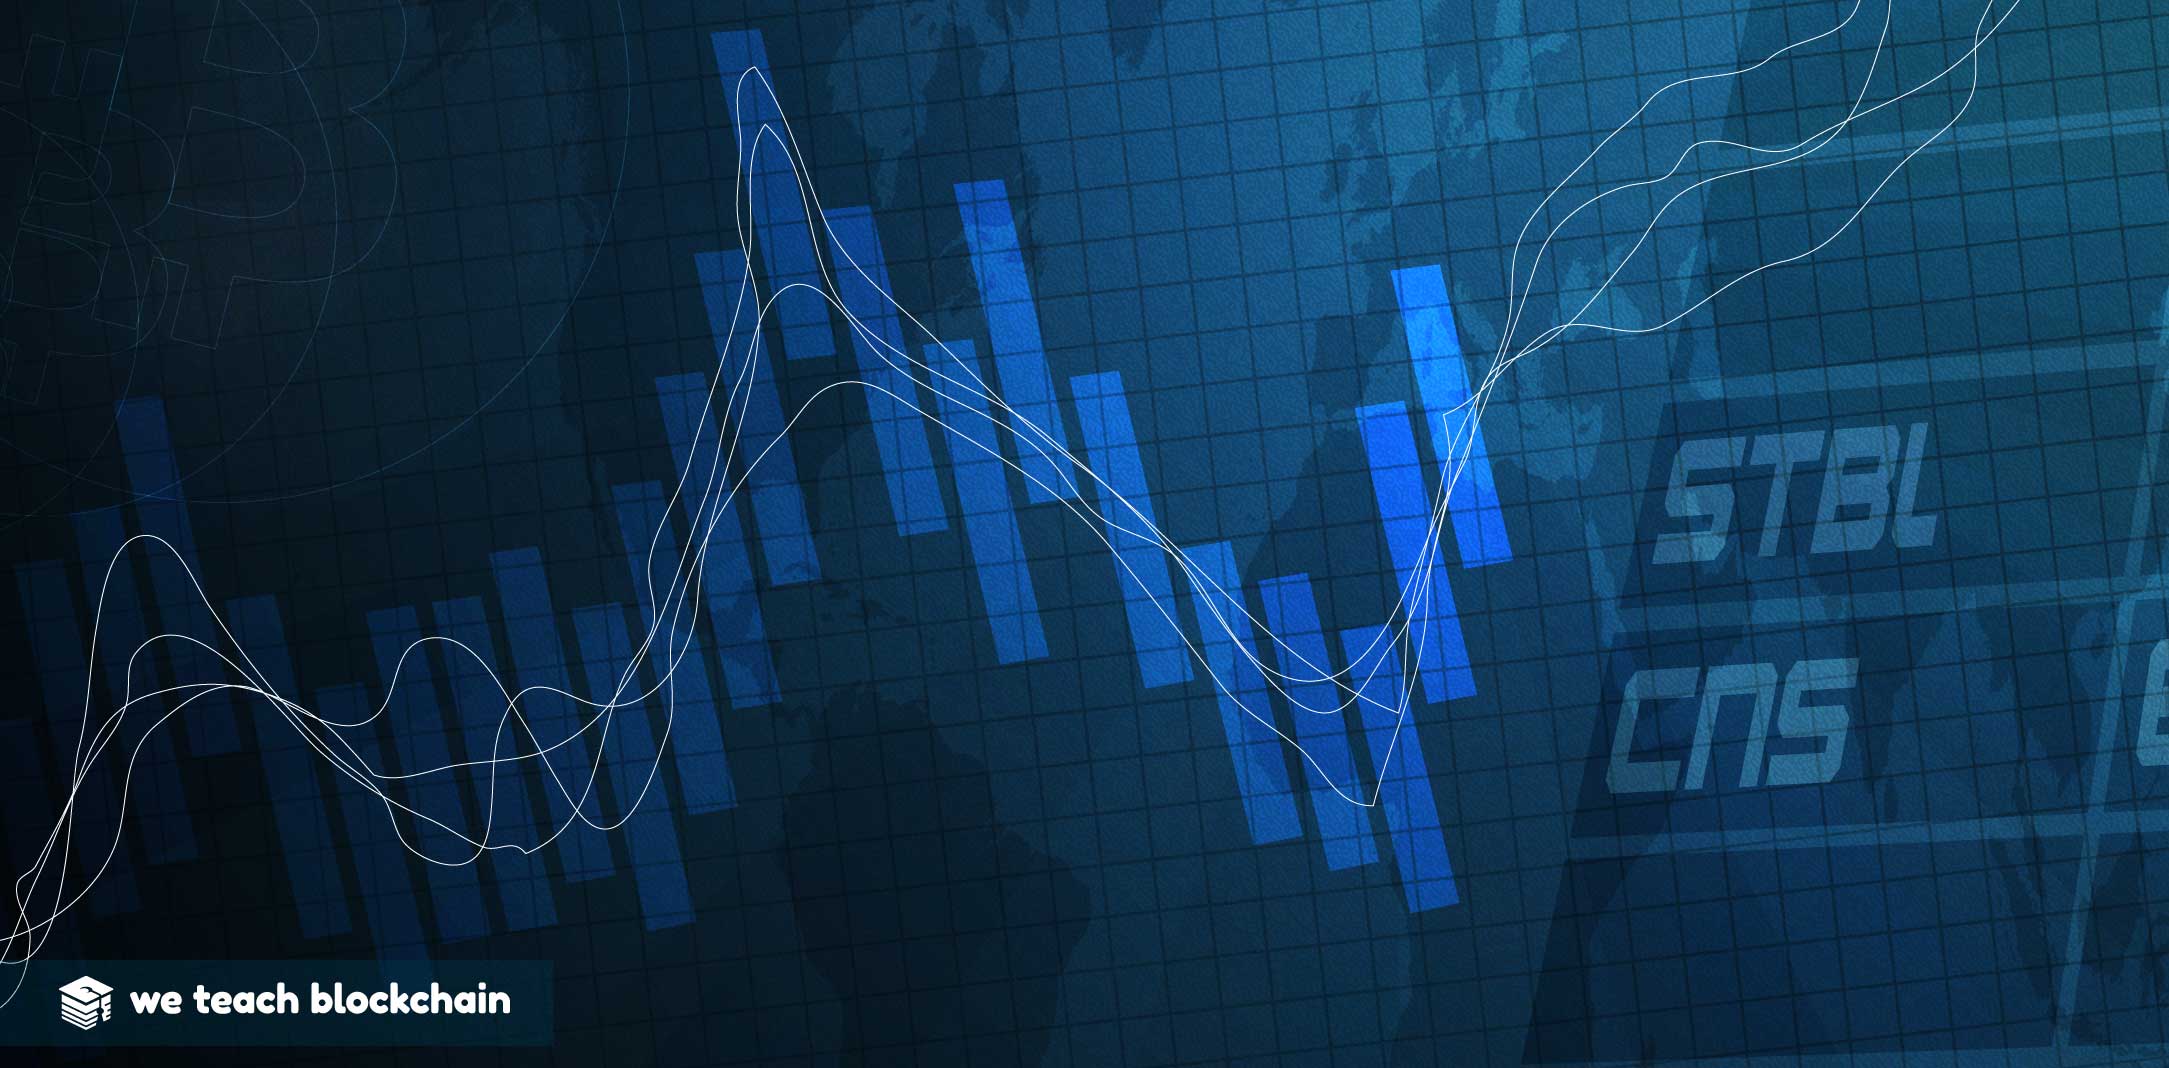 An abstract image of financial charts and graphs